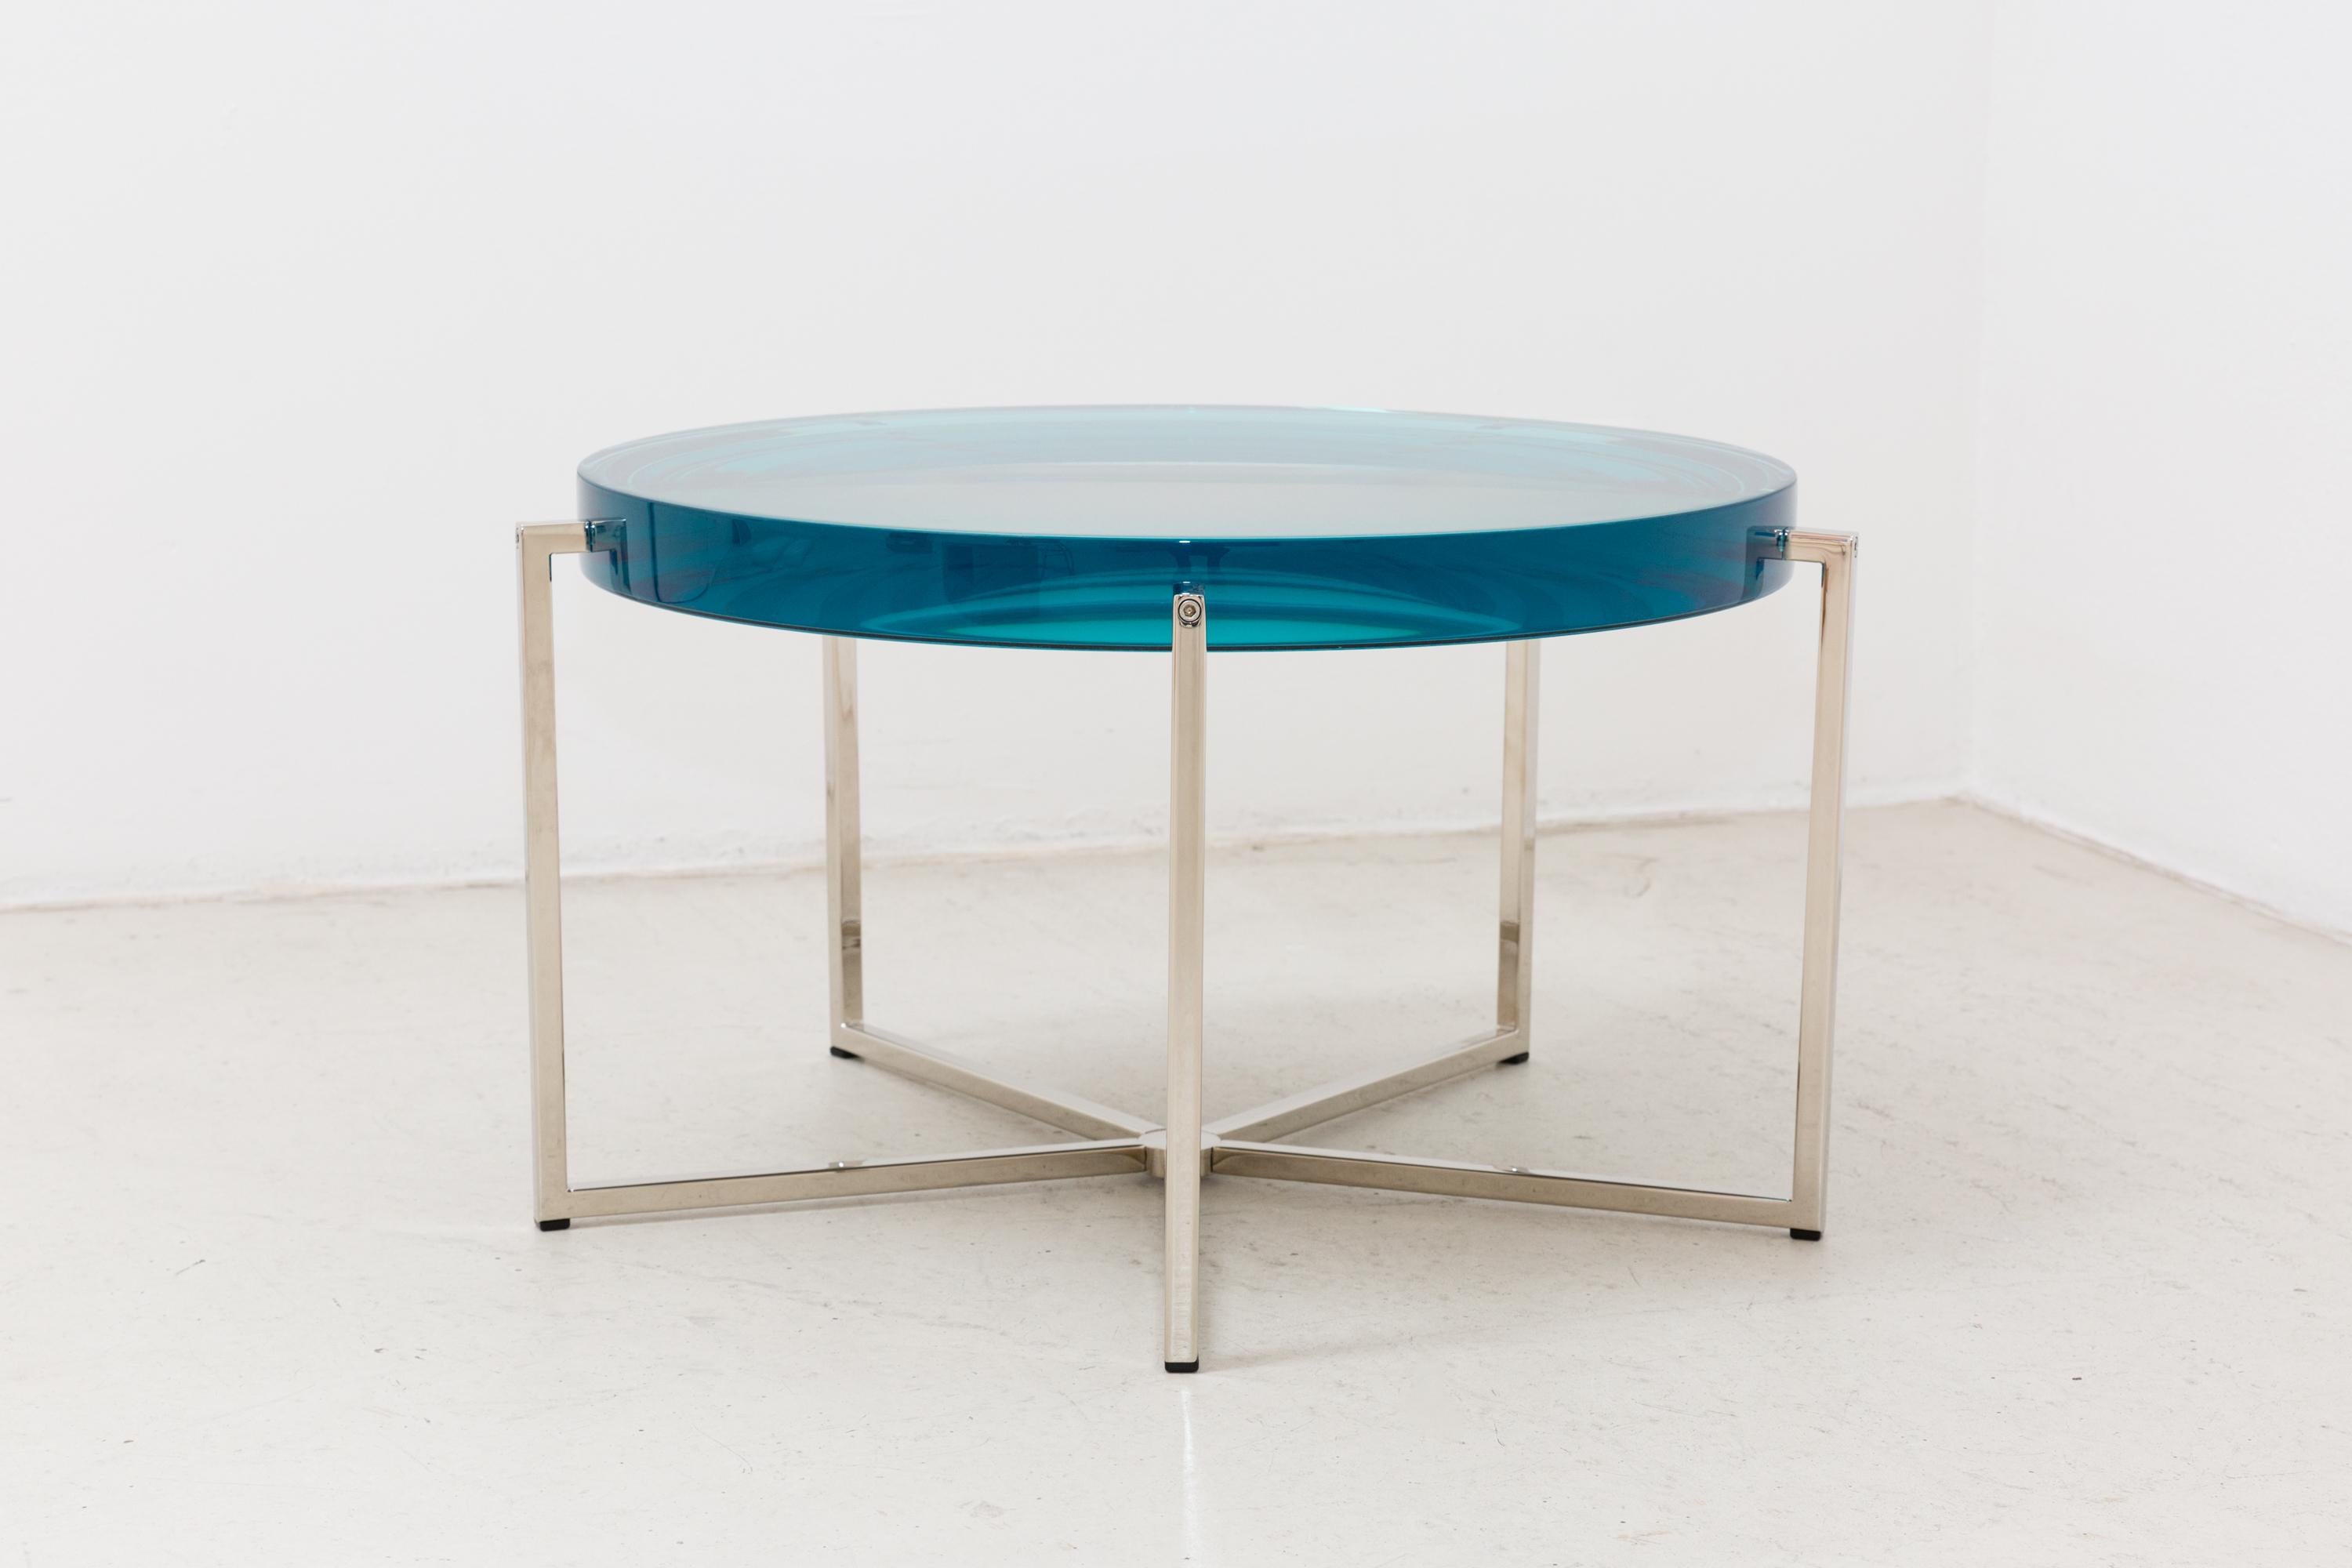 McCollin Bryan Lens table ins turquoise. Resin top backed by acrylic mirror on nickel base with five legs.